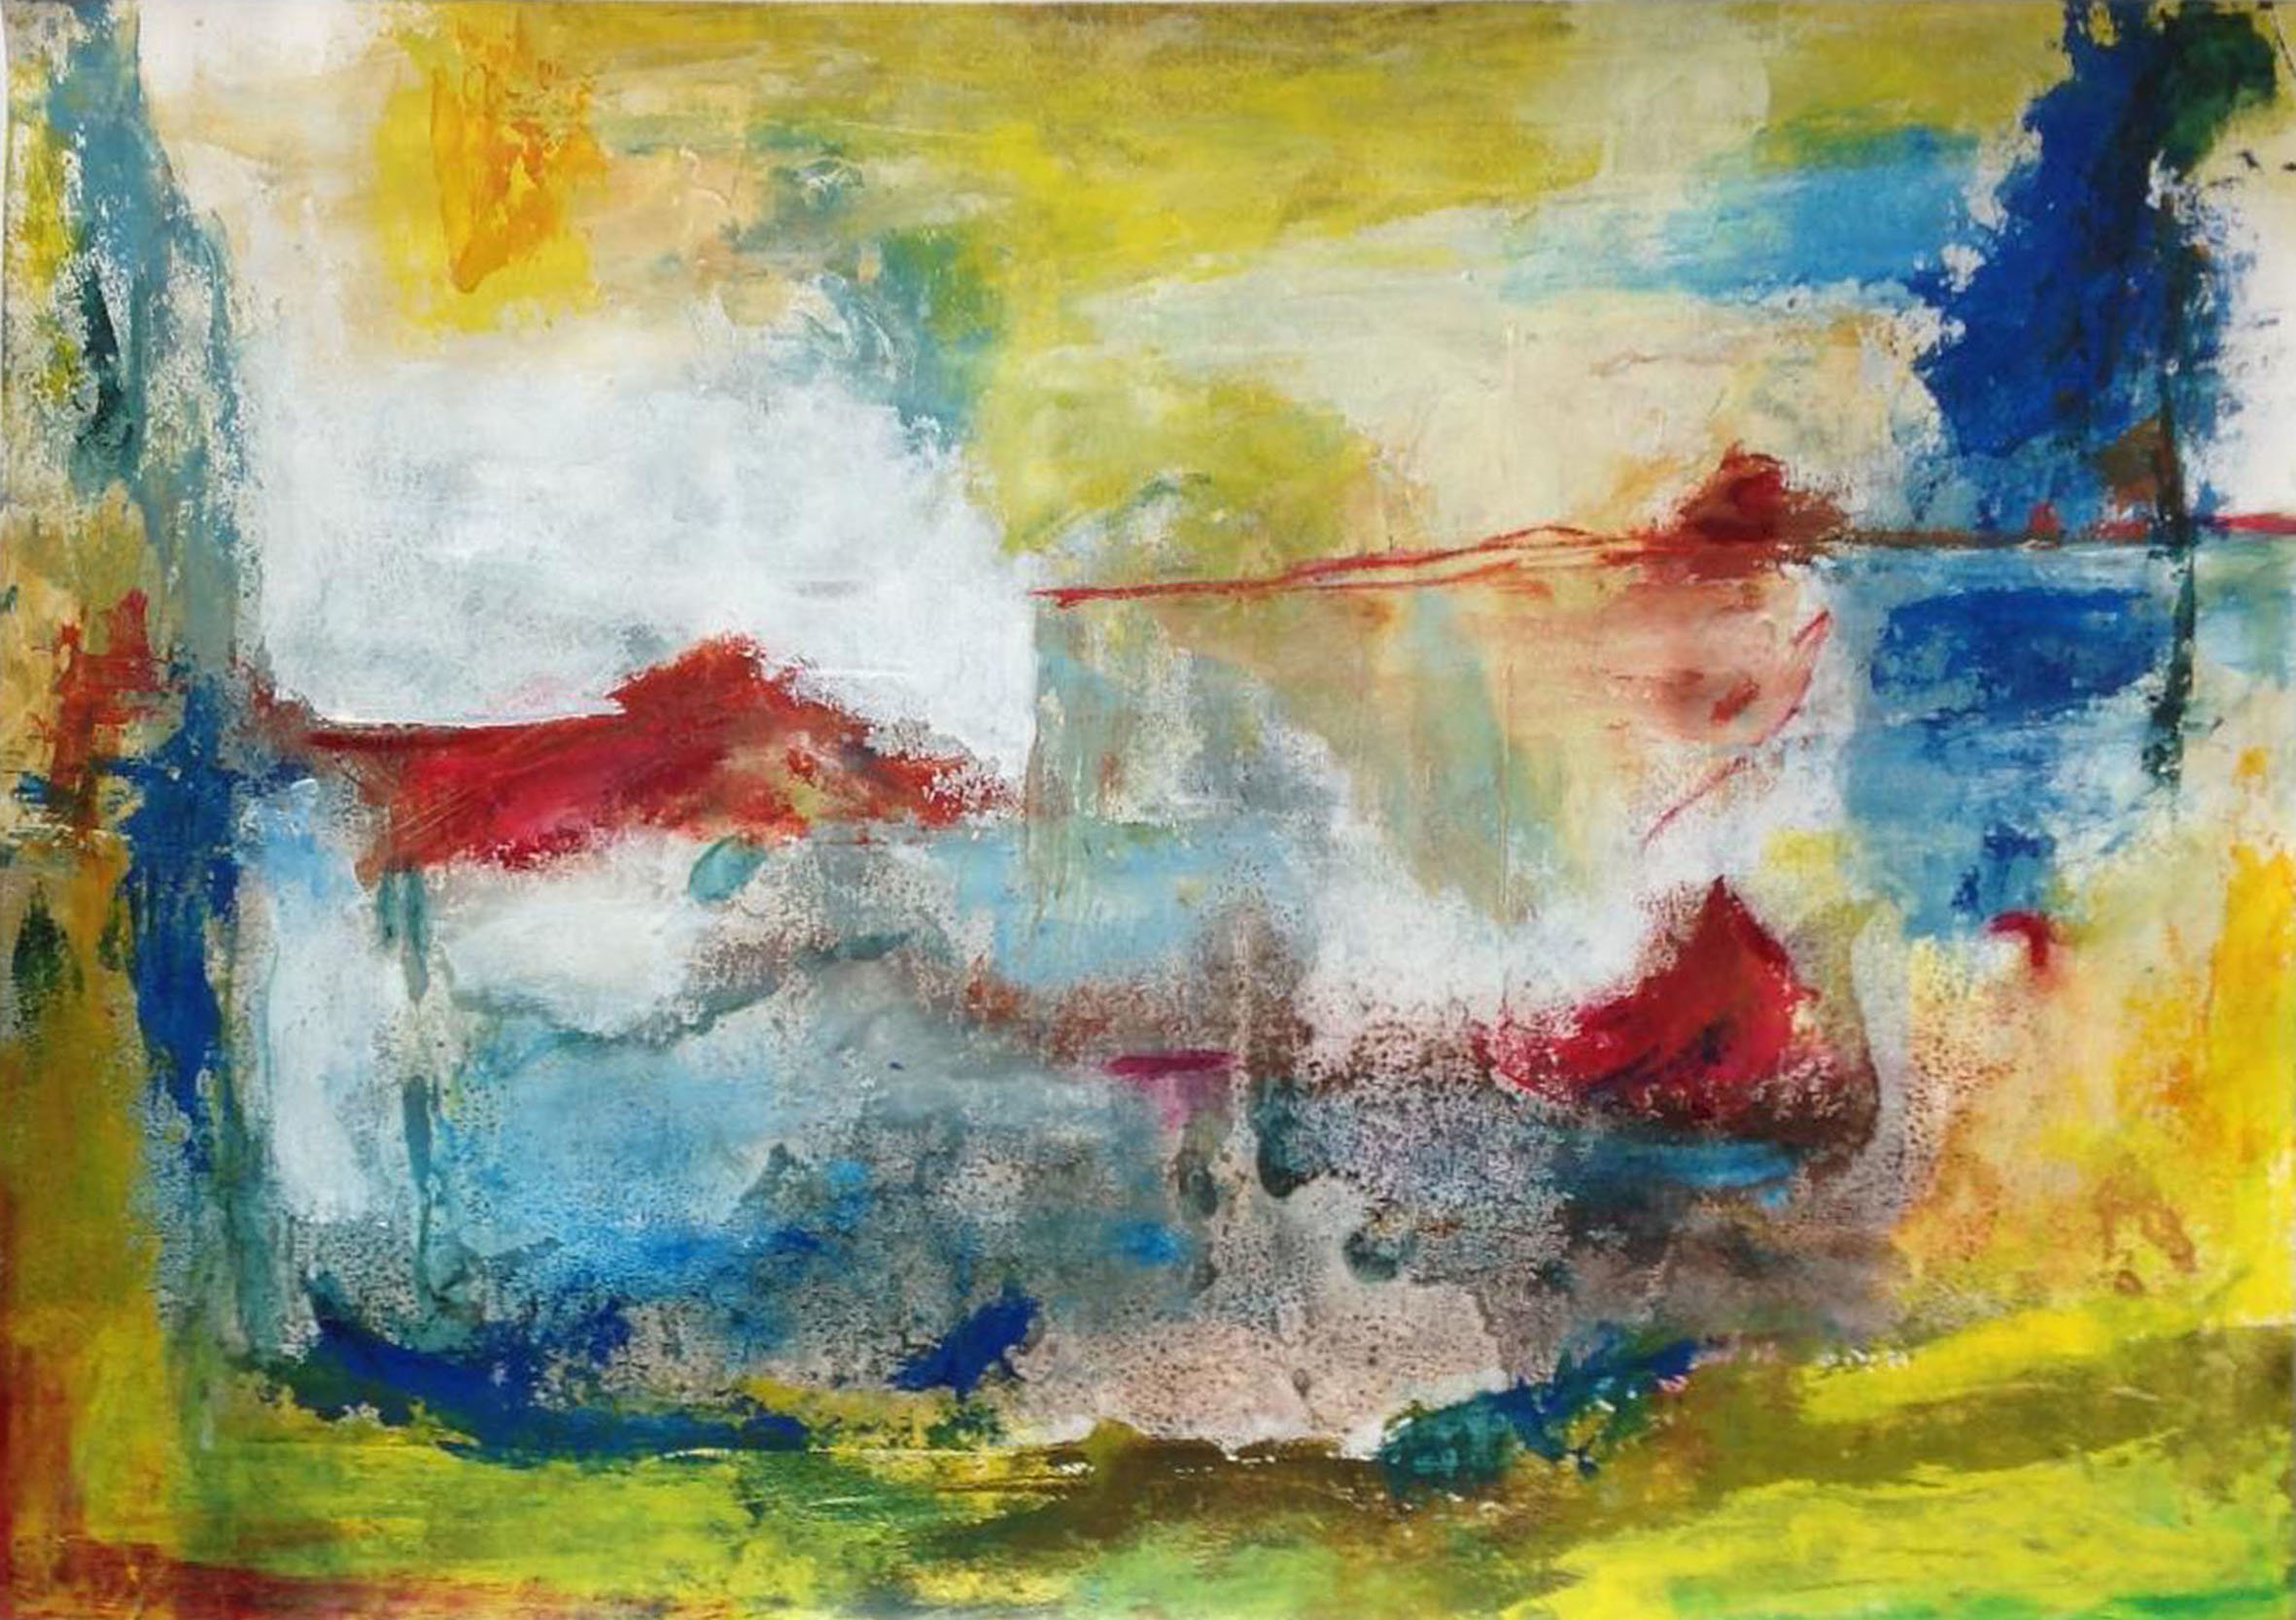 Ana Castro Feijoo; Breezes, 2019, Original Mixed Media, 70 x 50 cm. Artwork description: 241 mixed media on paper, abstract landscape with oils and inks and textures...